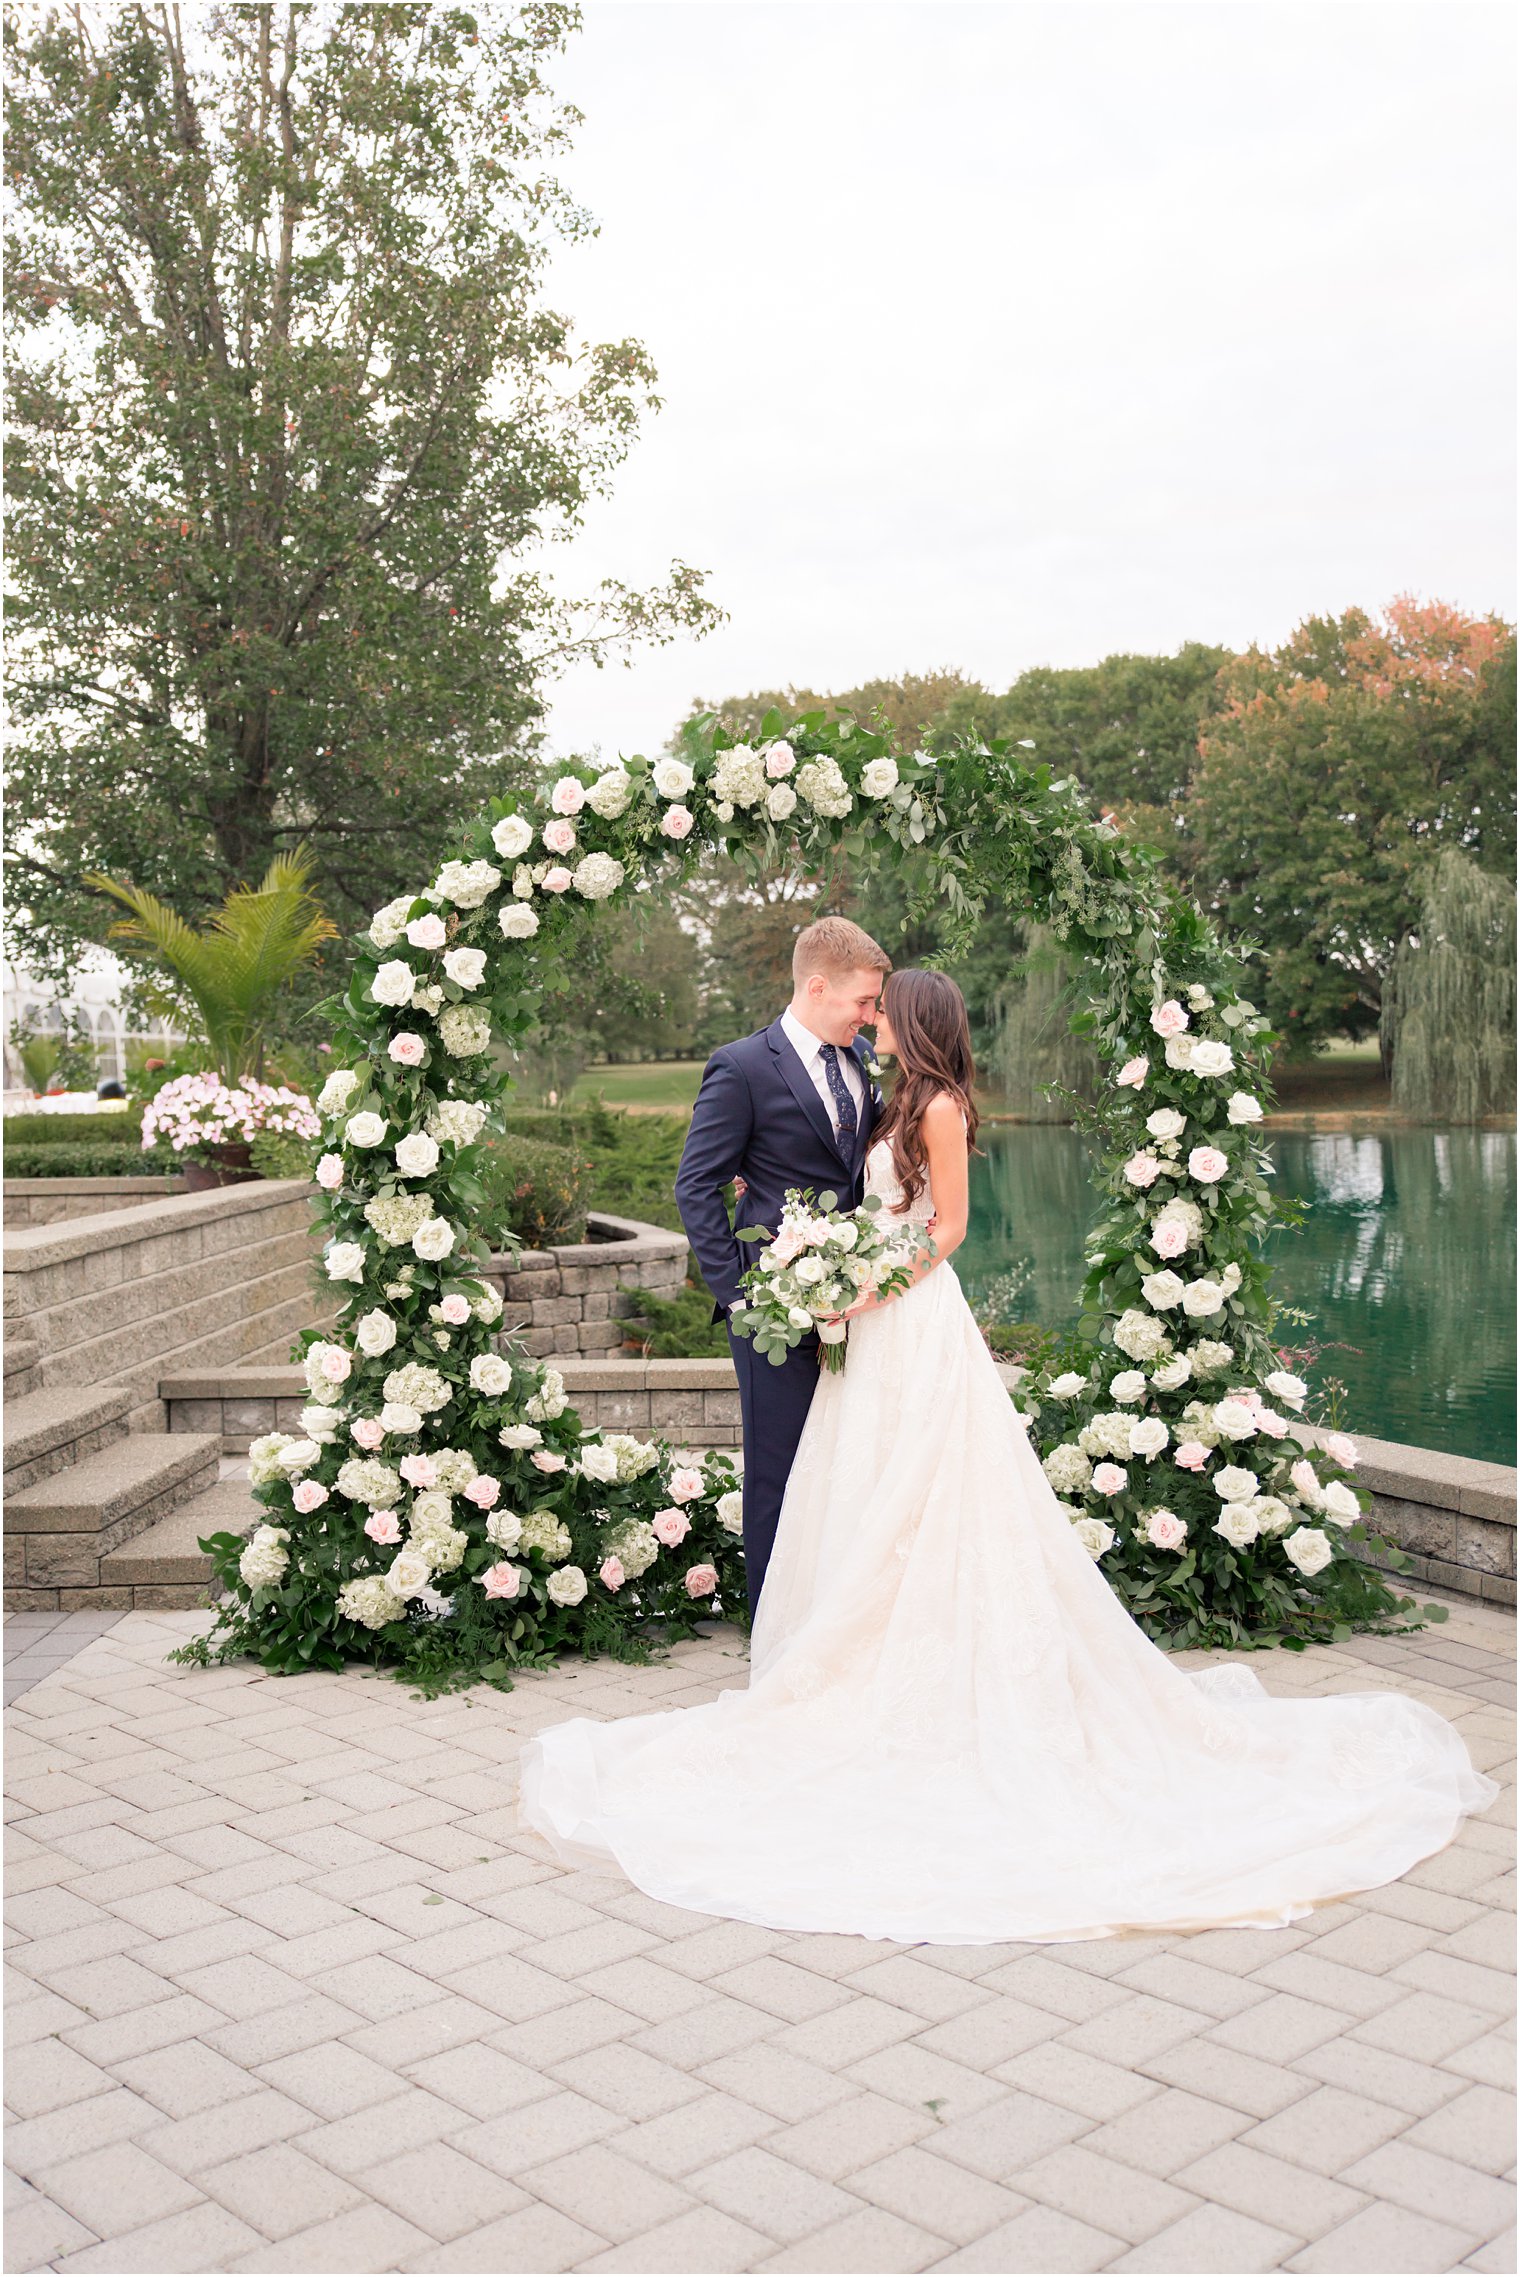 Bride and groom in front of oversized floral wreath by Bespoke Floral Design